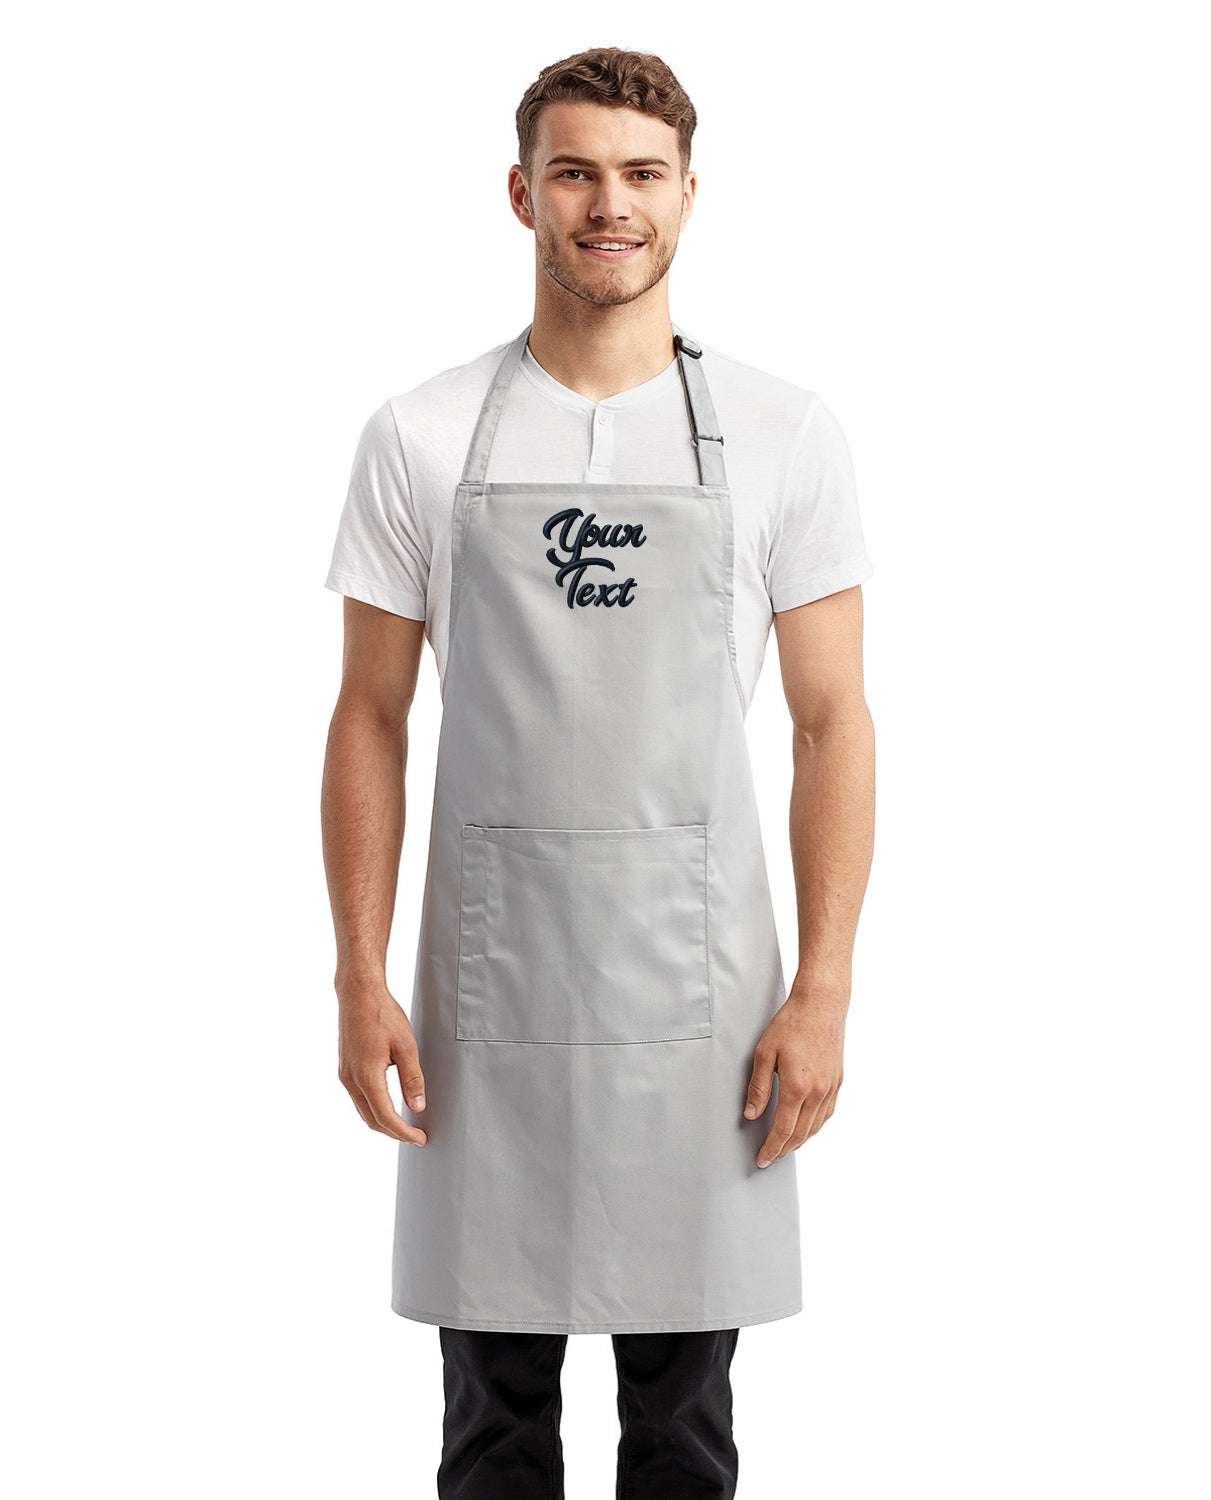 Restaurant Aprons with Your Company Name Embroidered - 3 Pack light grey